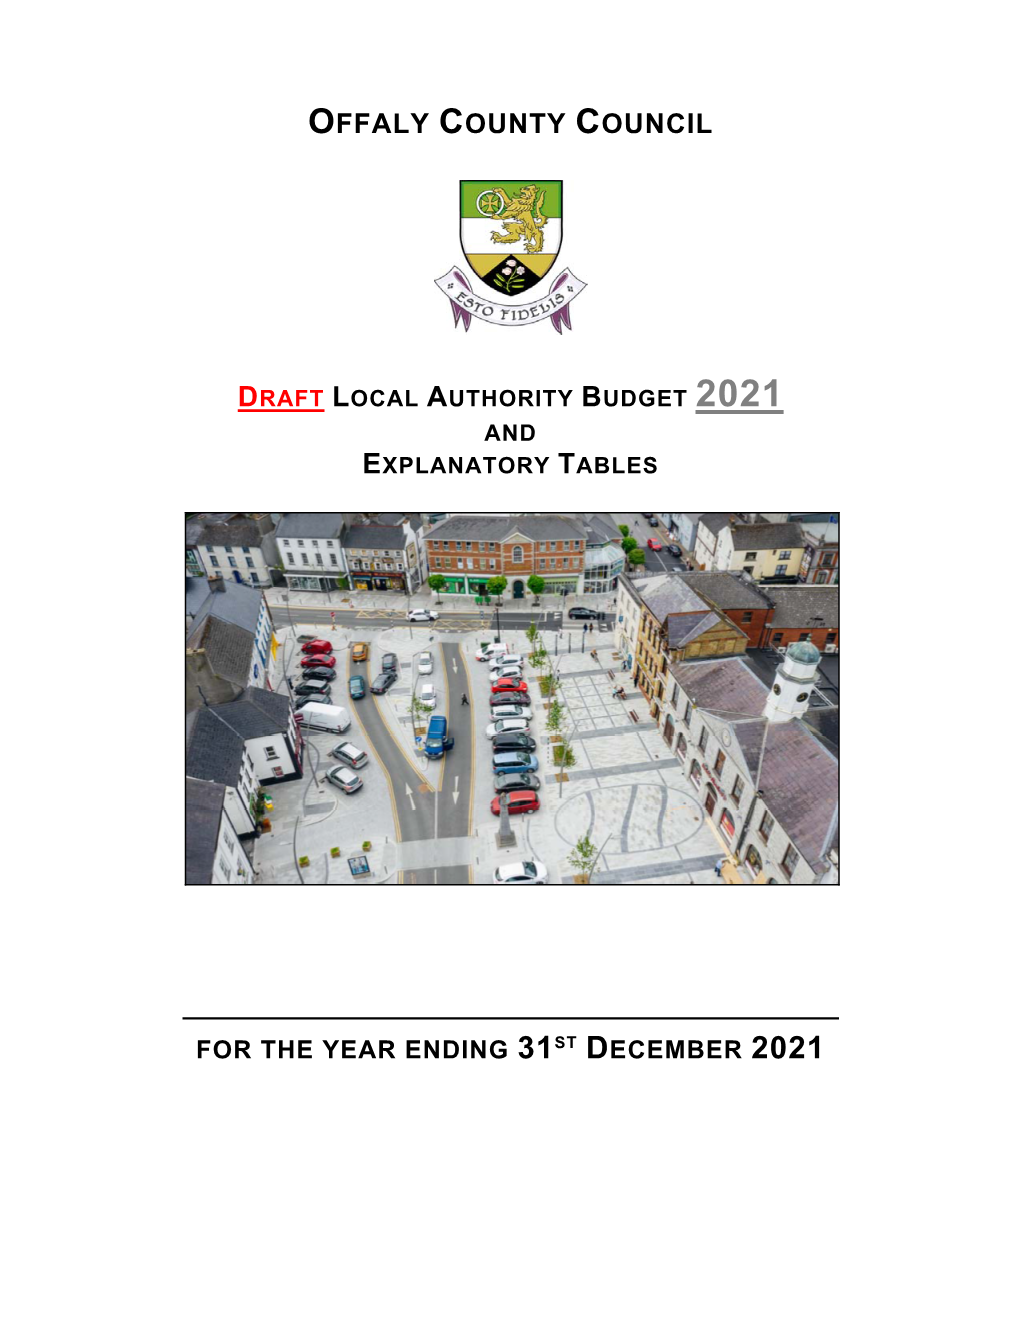 Offaly County Council Draft Local Authority Budget 2021